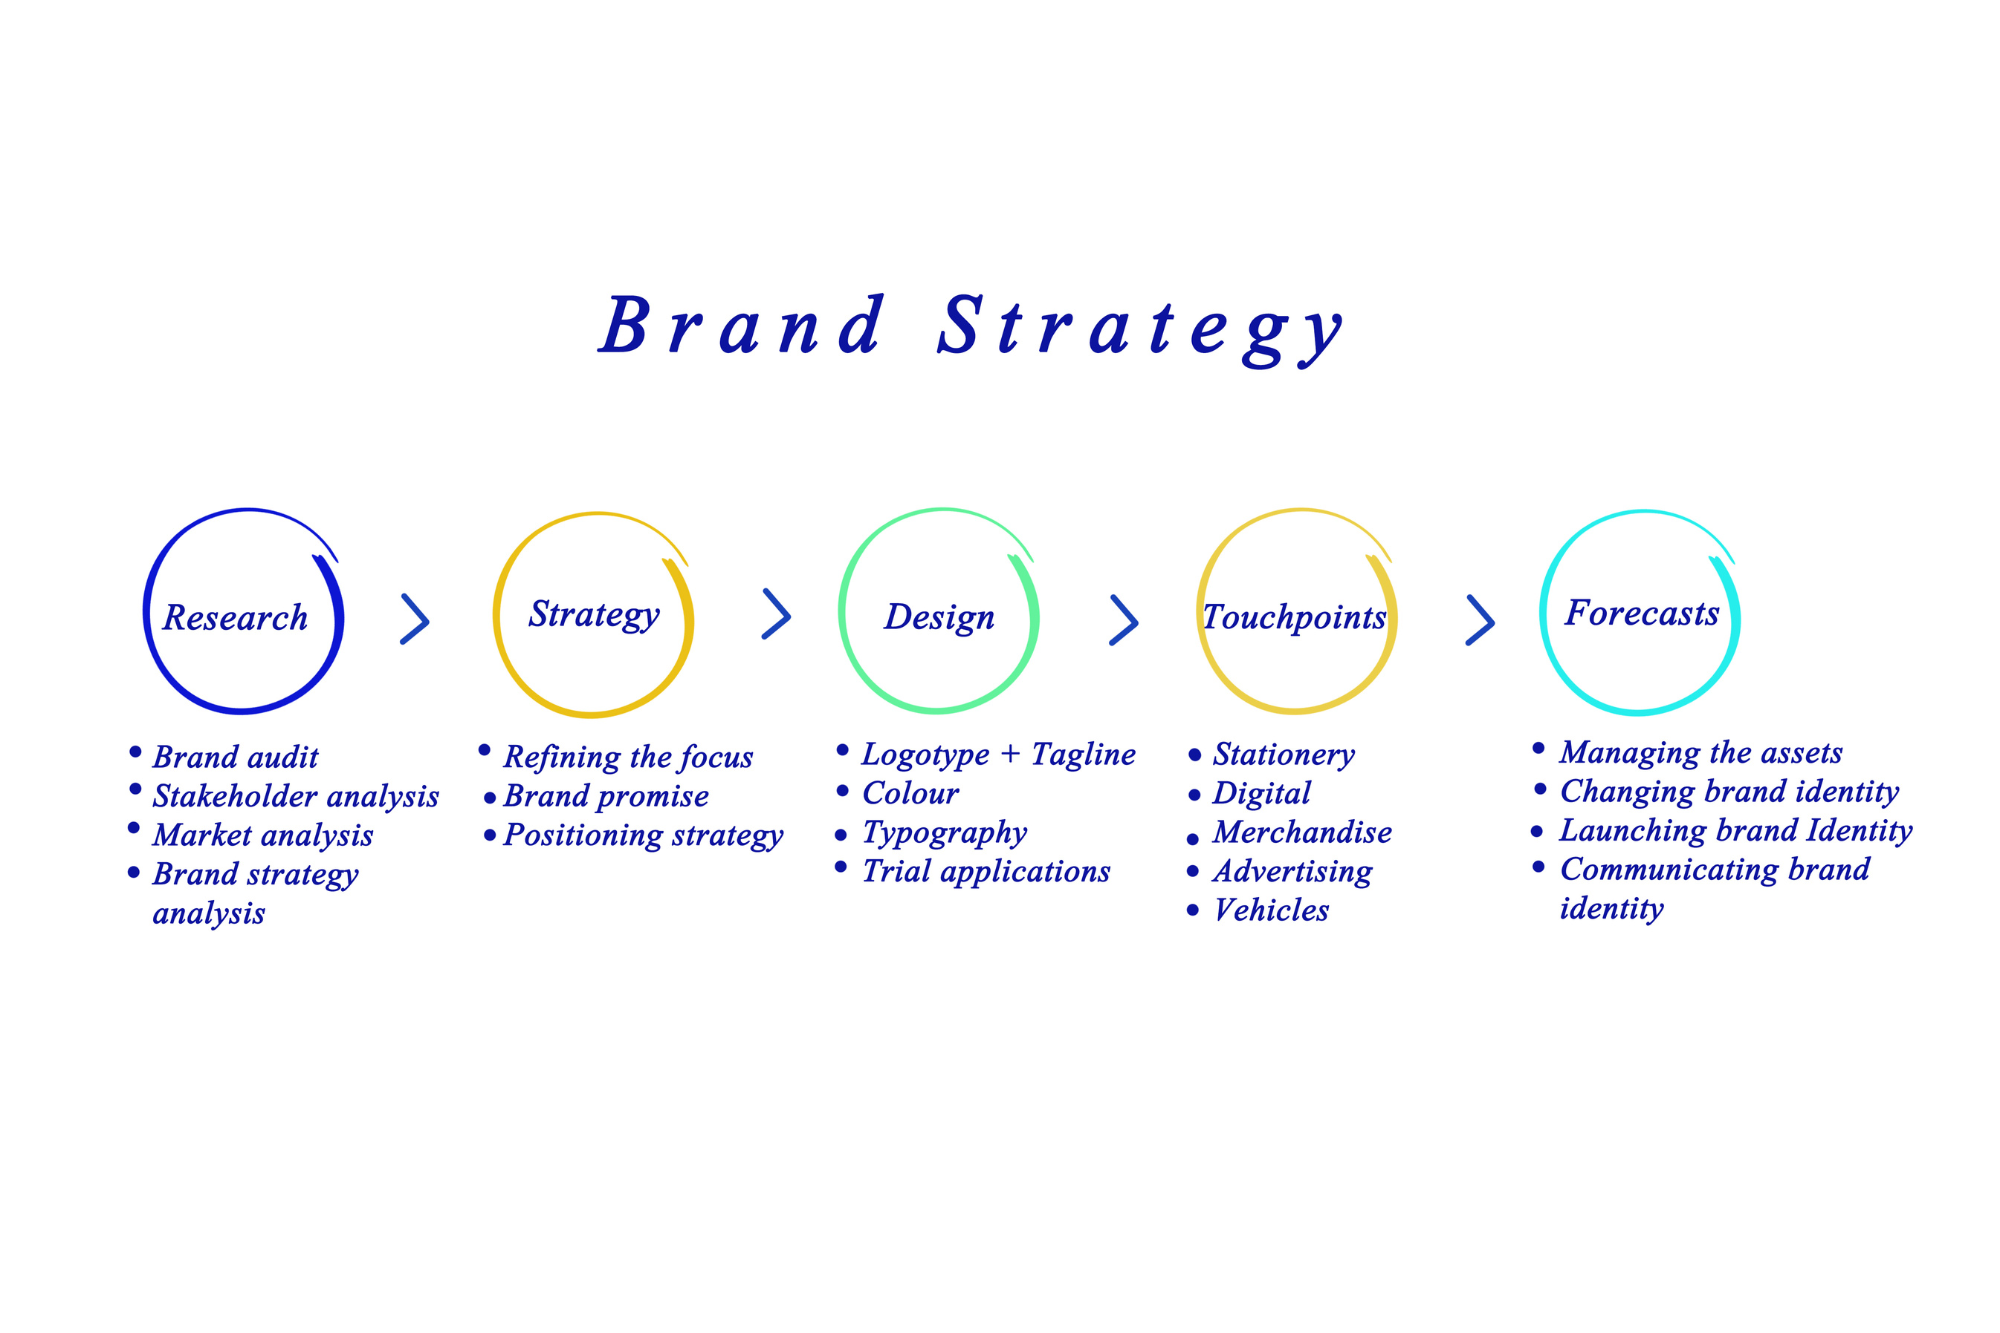 Developing a brand strategy will help you understand what you need to build your business.